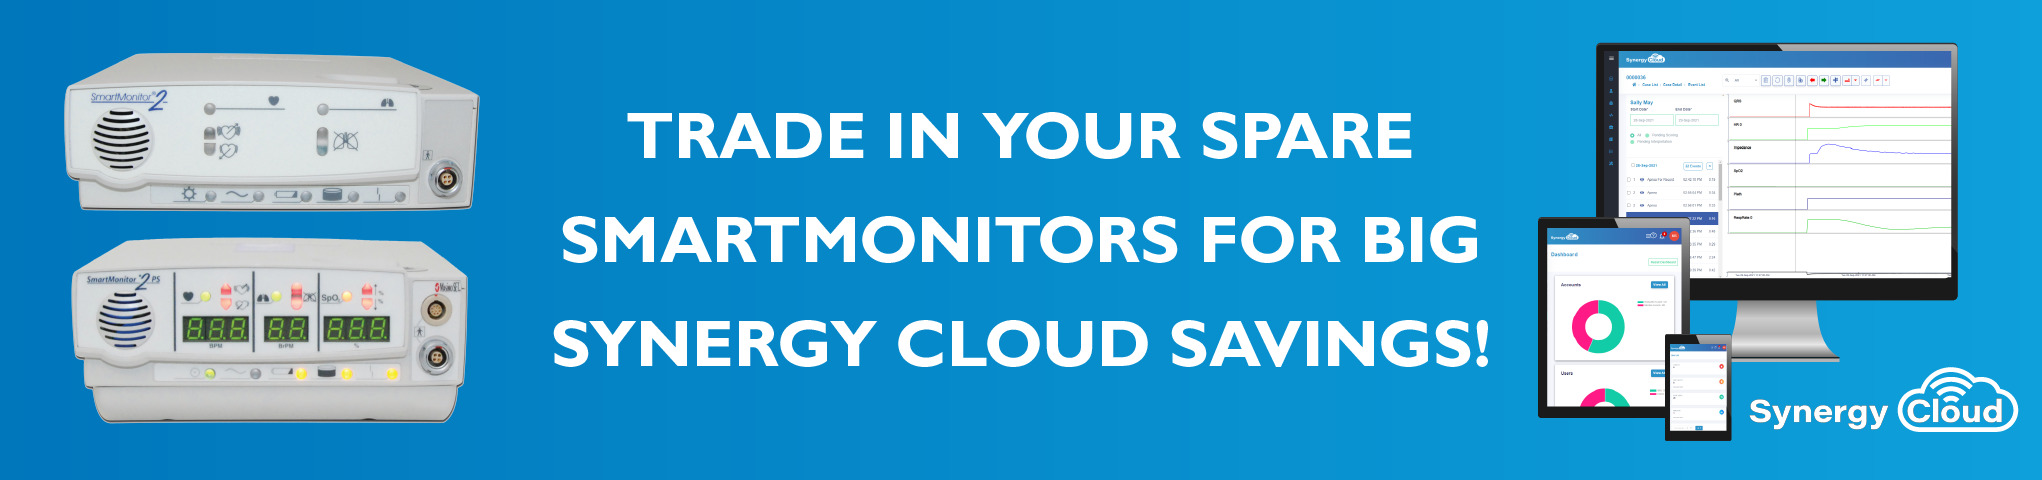 Trade in SmartMonitor 2 for Synergy Cloud